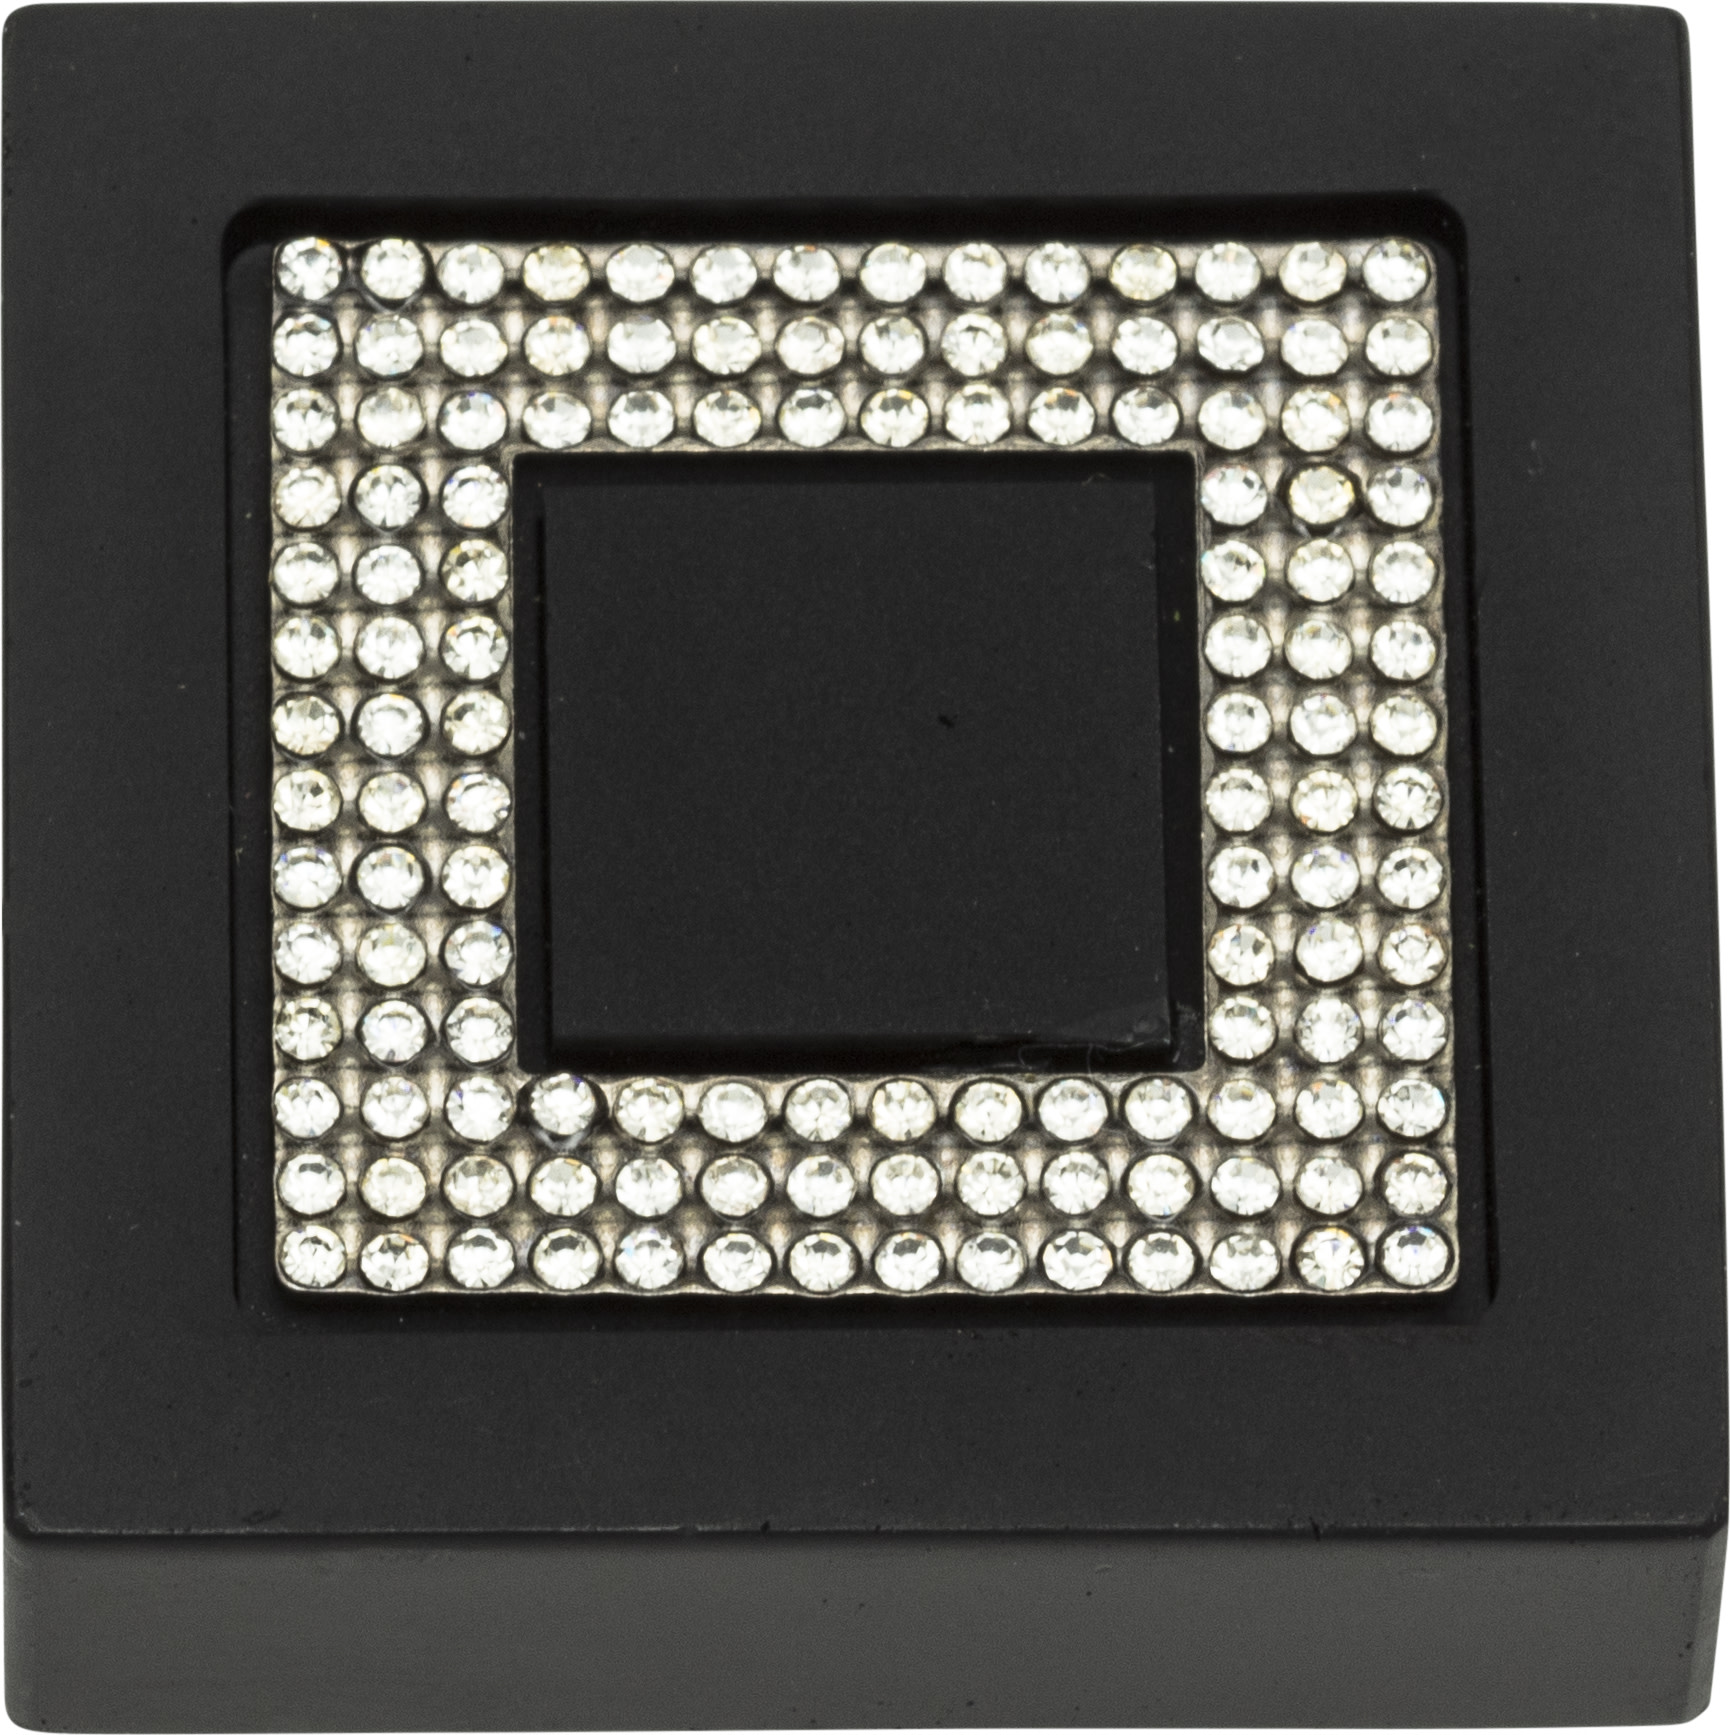 Crystal Pave 1.4 in. Square Knob - 3192-MC (Matte Chrome) - image 5 of 5